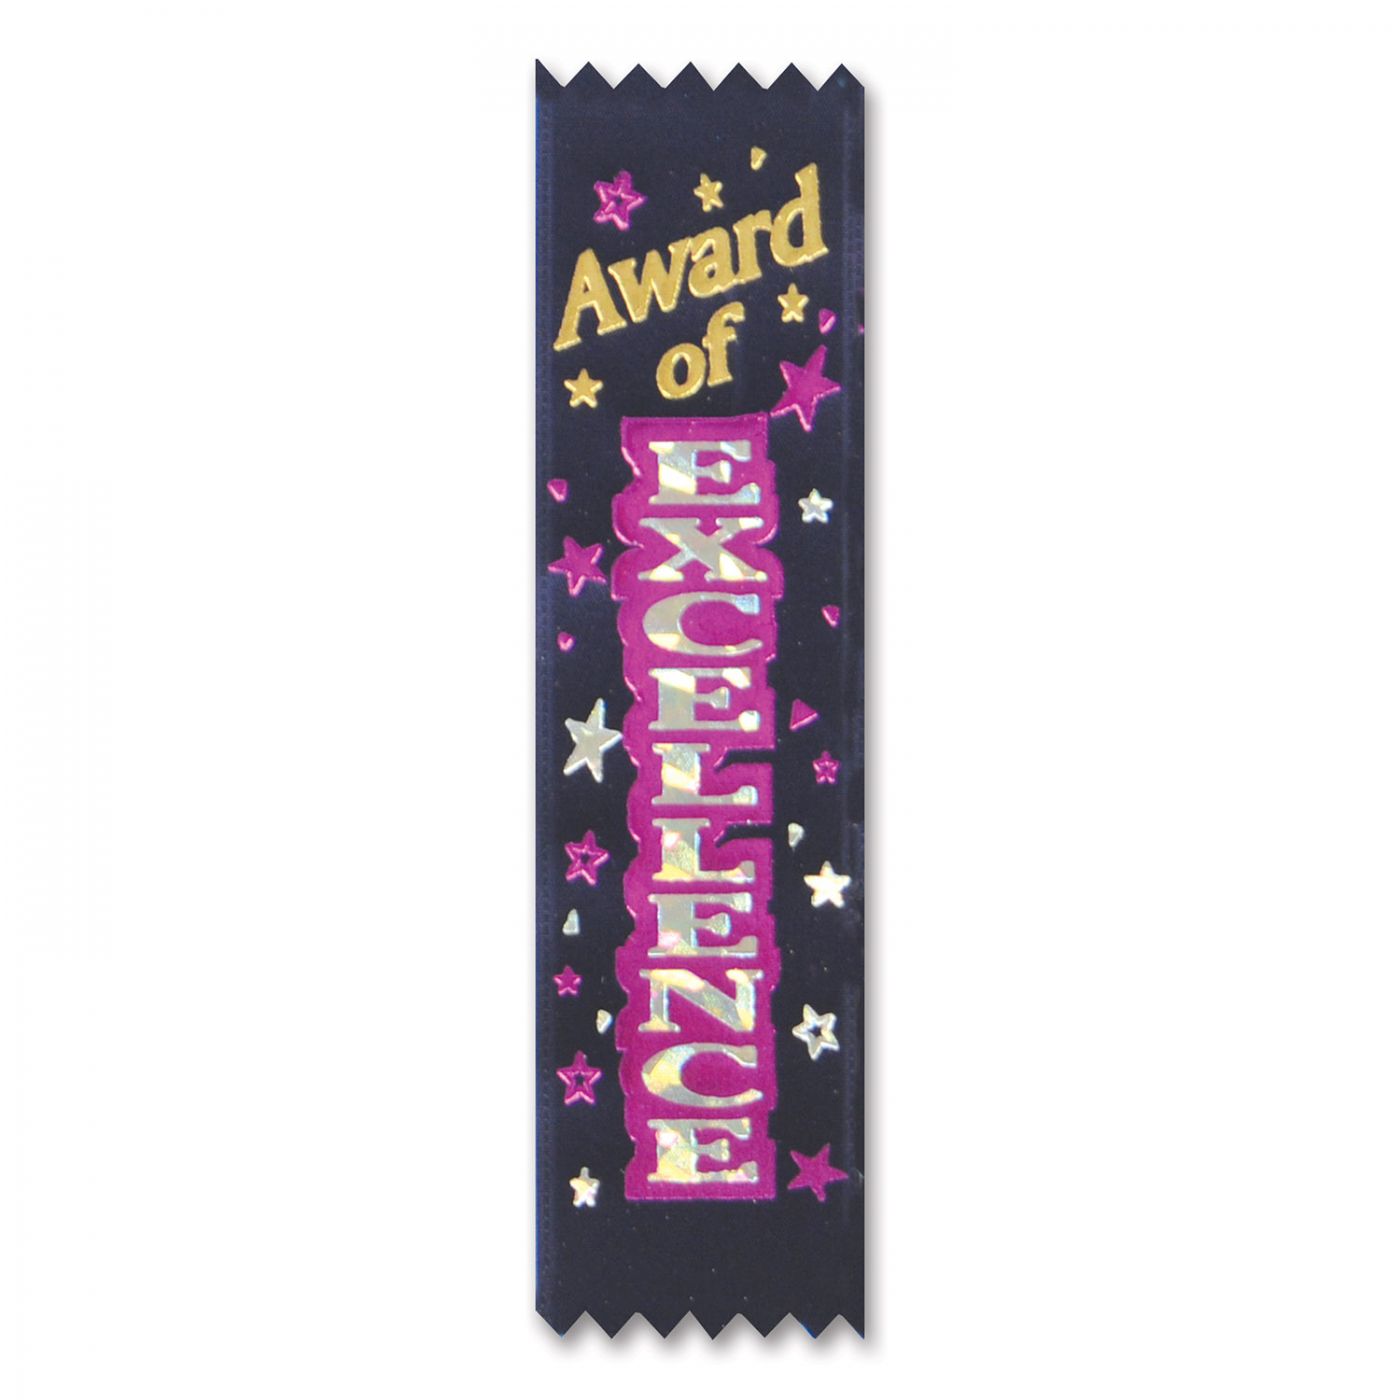 Award Of Excellence Value Pack Ribbons (3) image